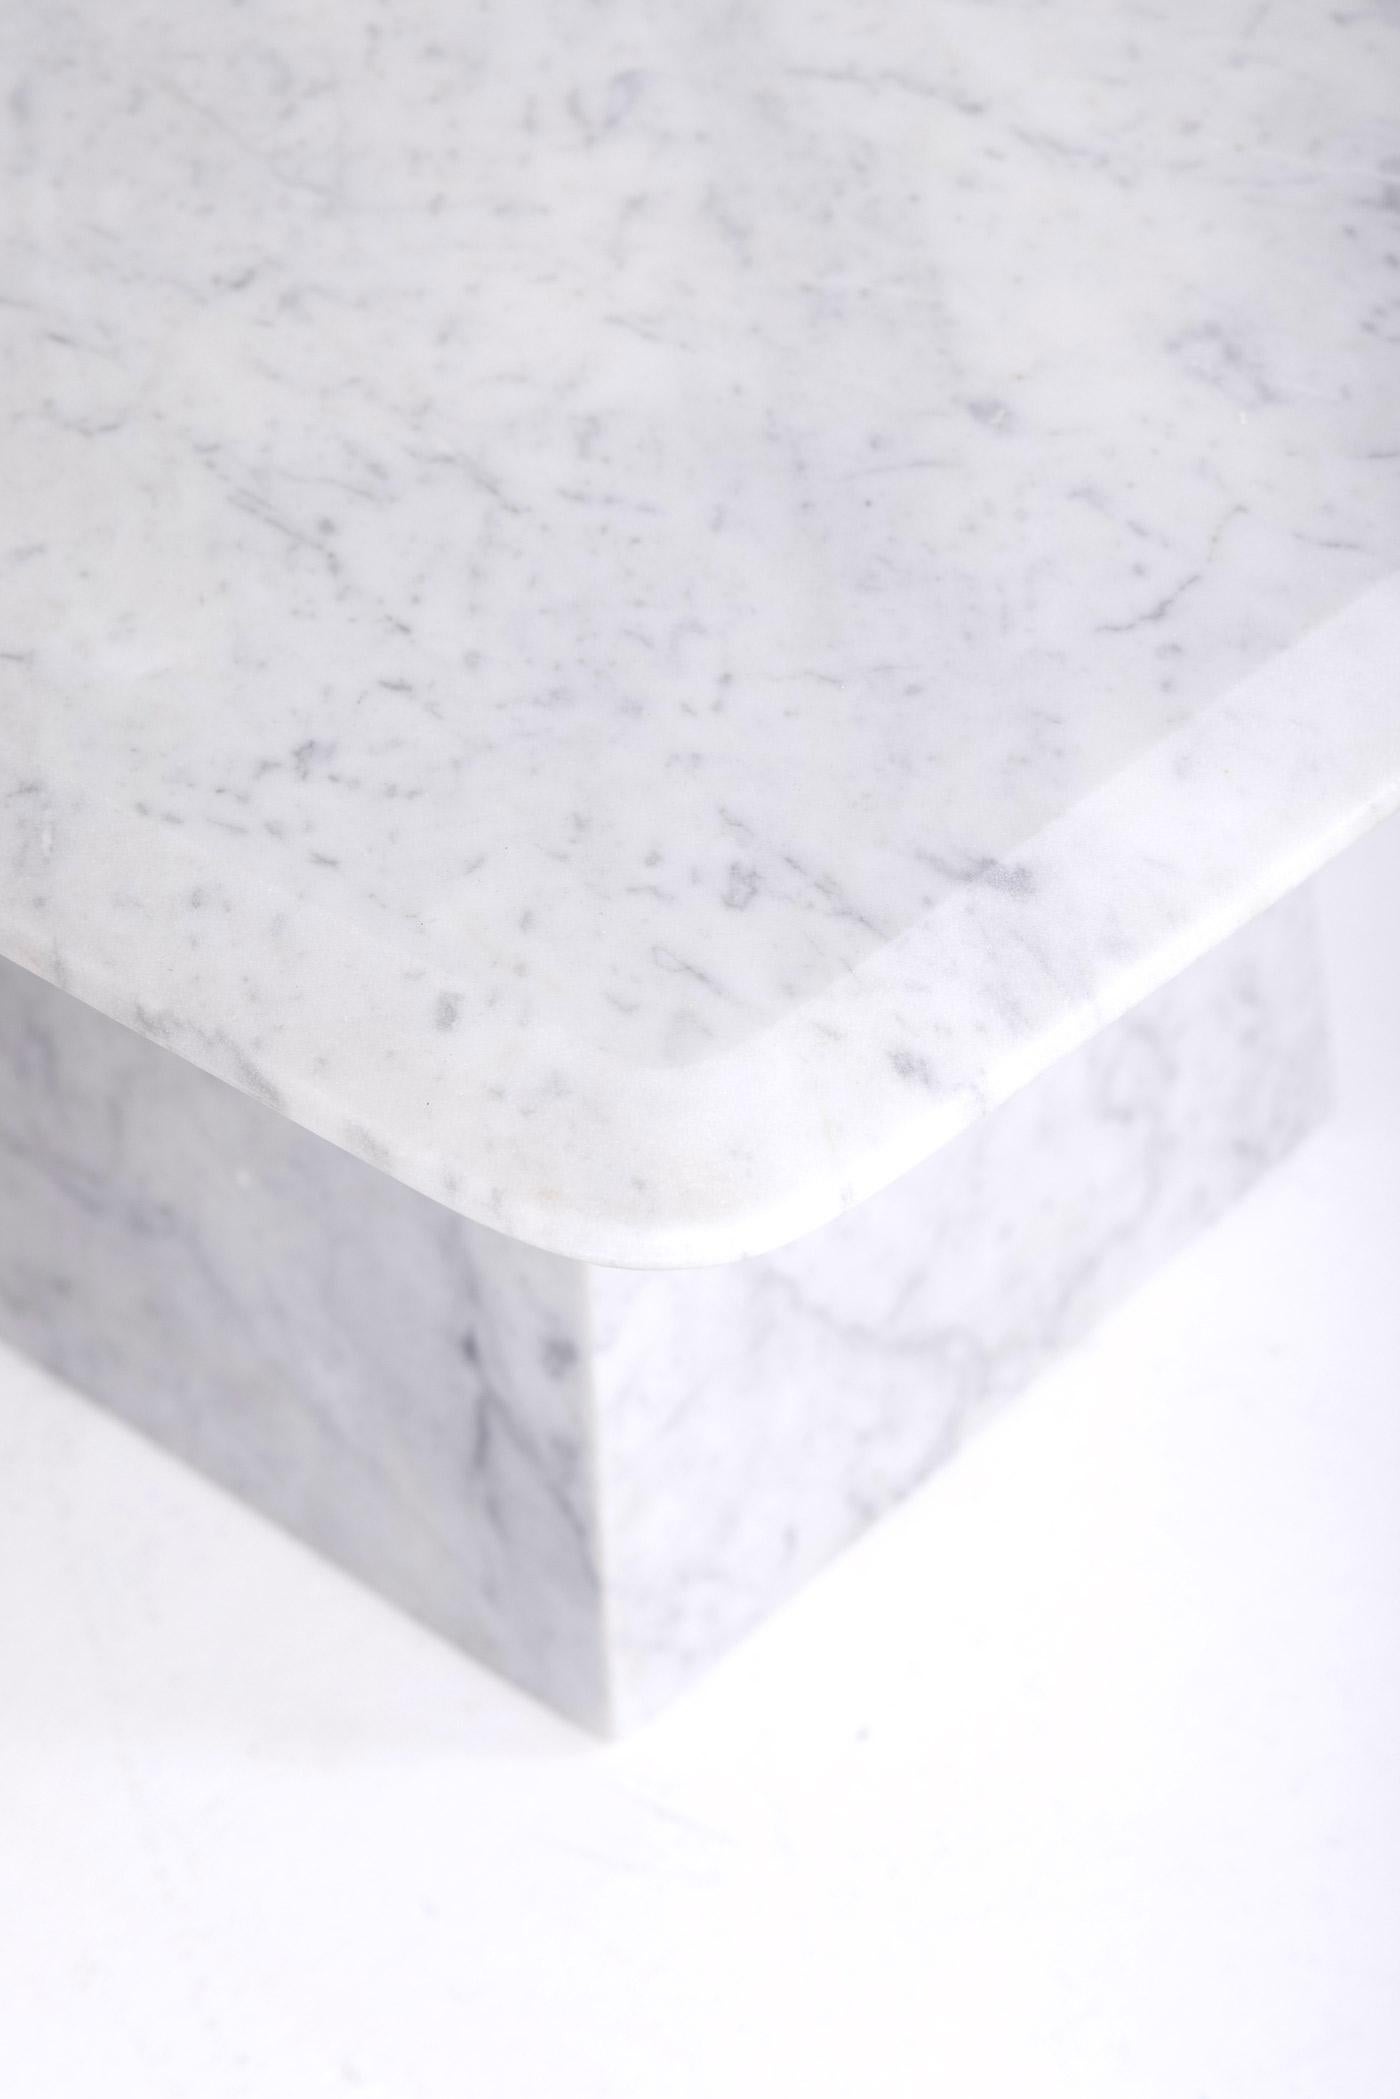 Square marble coffee table 2